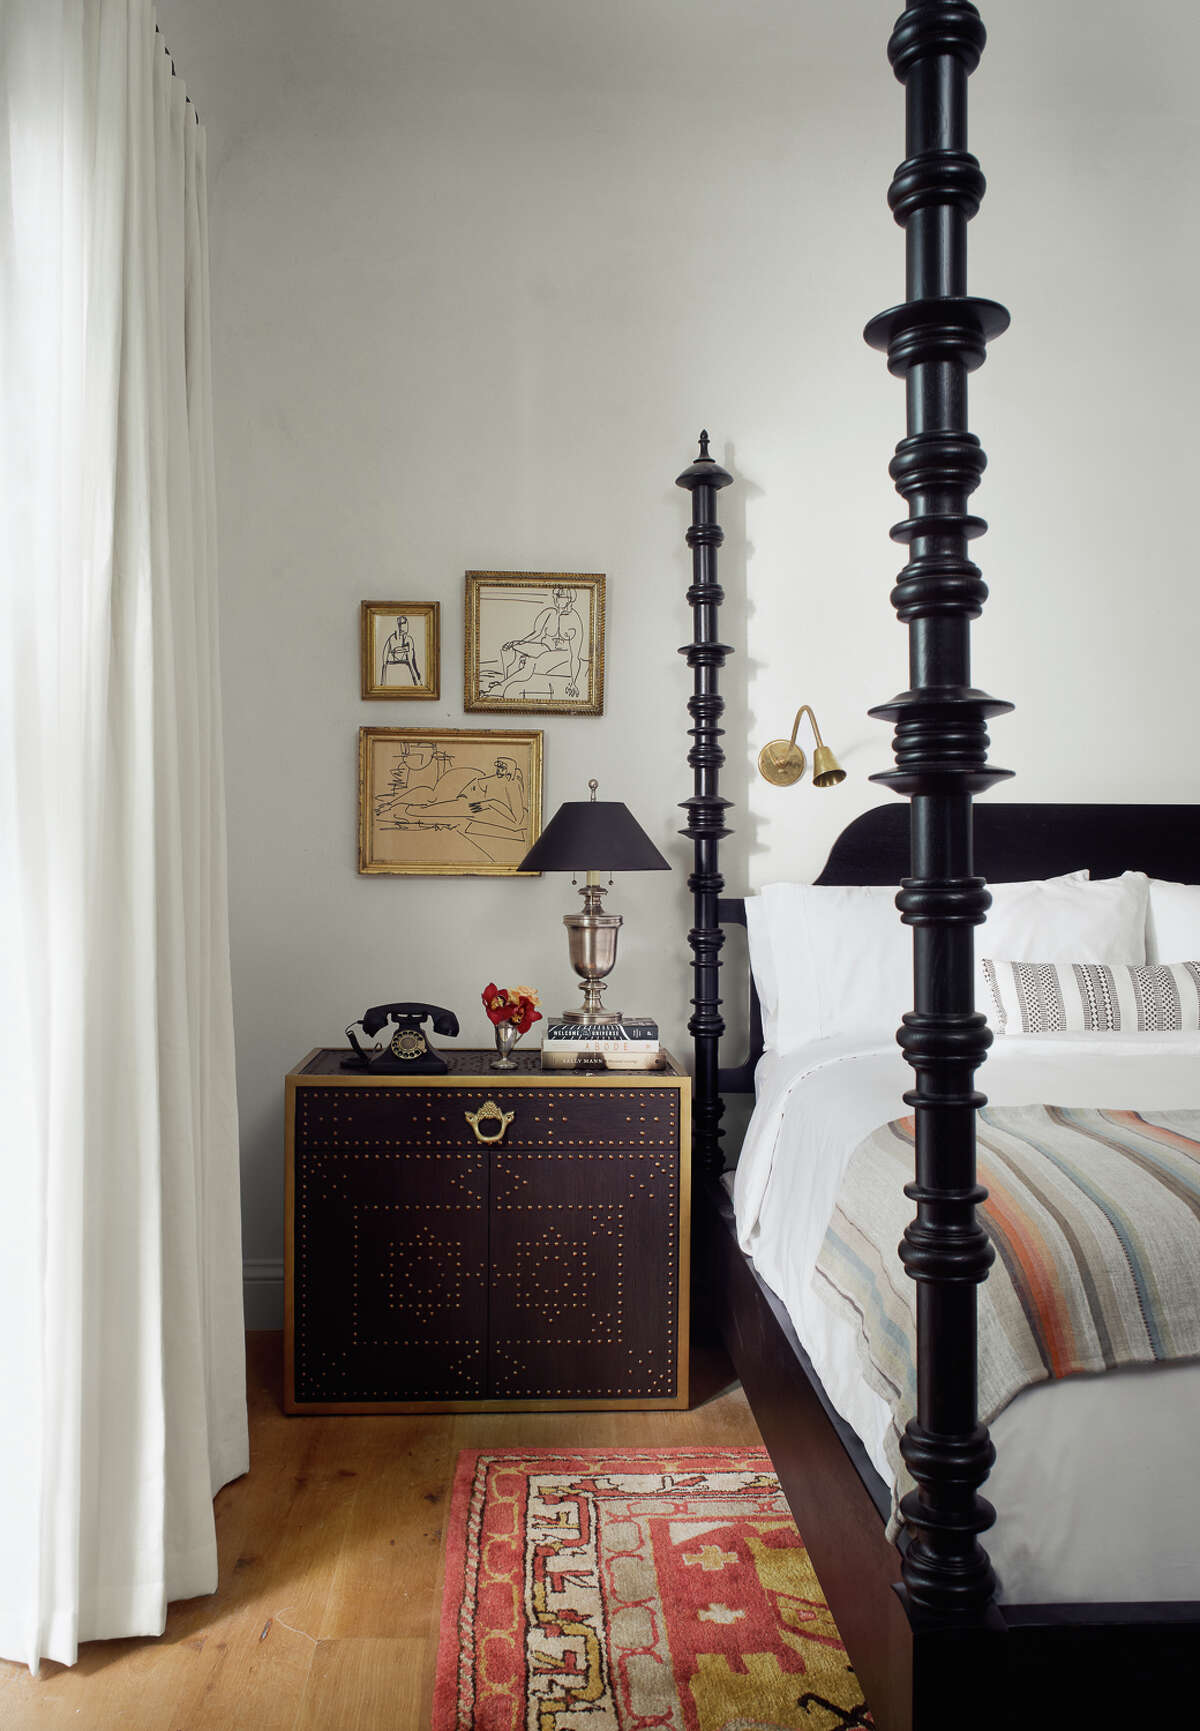 Spacious rooms are furnished with heirloom and vintage pieces.  A room with balcony opens up to a serene courtyard.